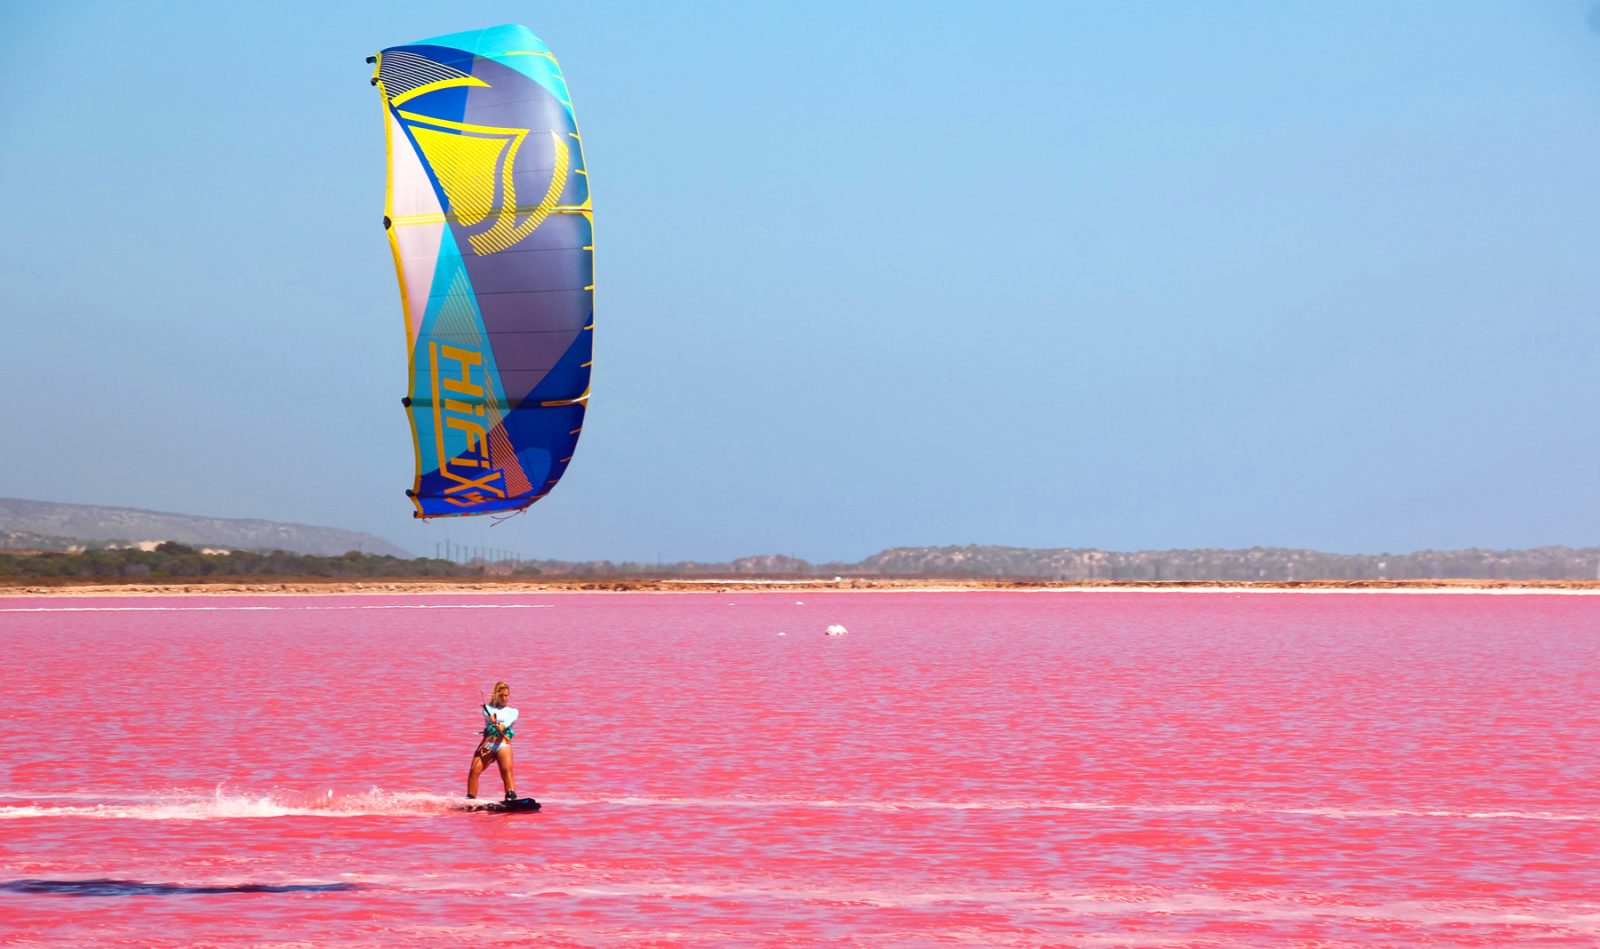 Kiting in the Pink with Kea Janssen